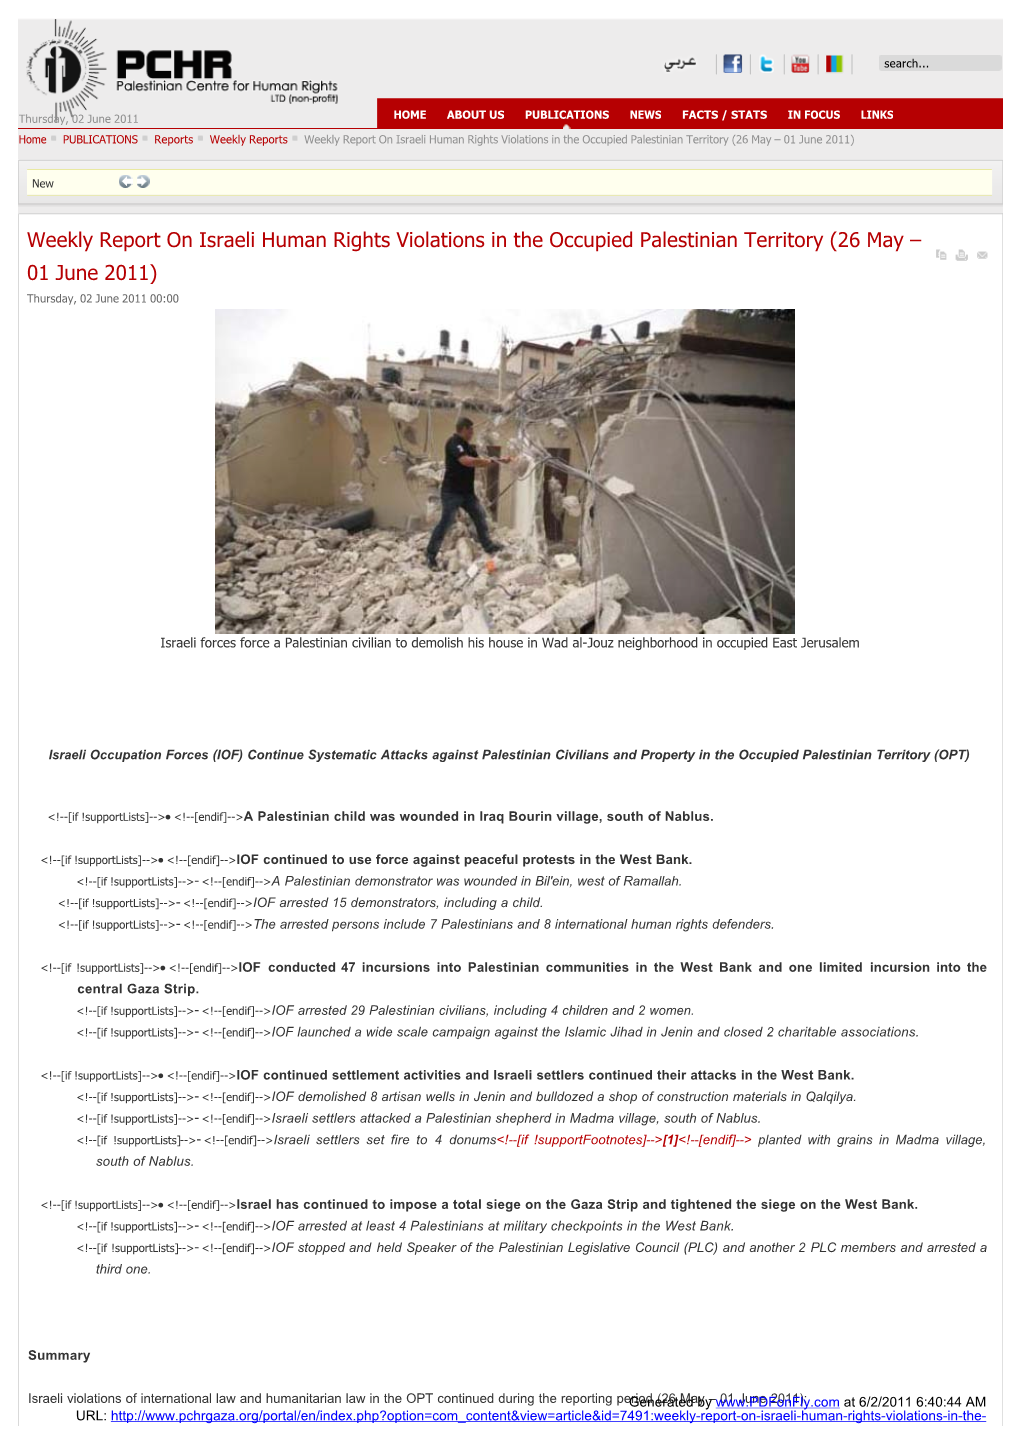 Weekly Report on Israeli Human Rights Violations in the Occupied Palestinian Territory (26 May – 01 June 2011)